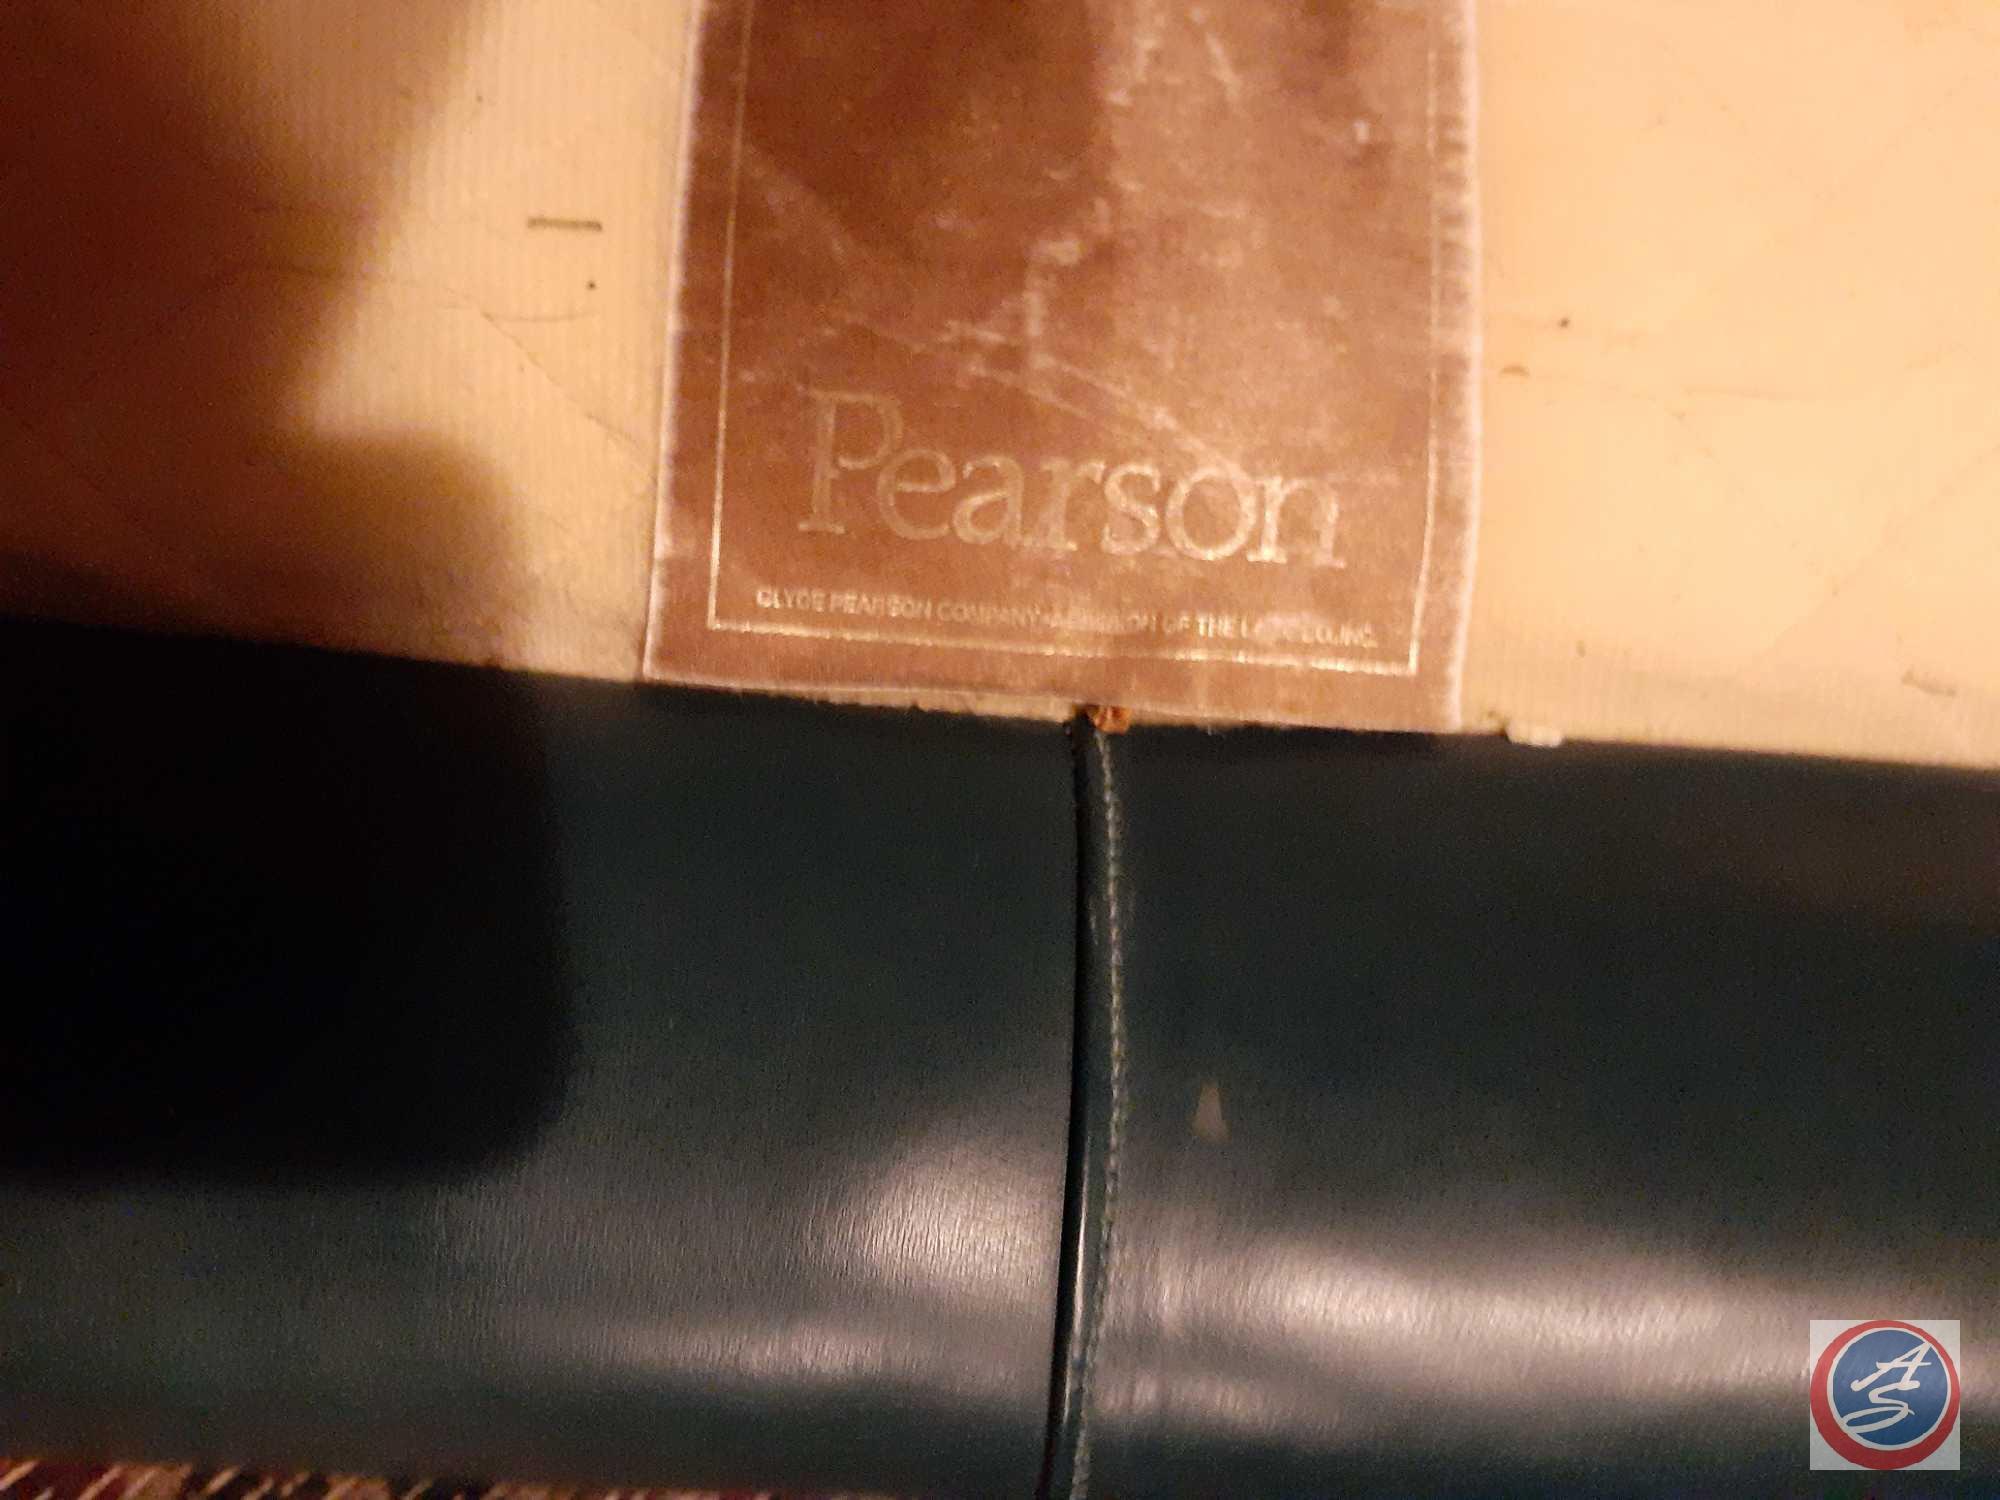 Pearson U Shaped Leather Couch Measuring 96'' x 95'' x 95'' x 39'' x 30''